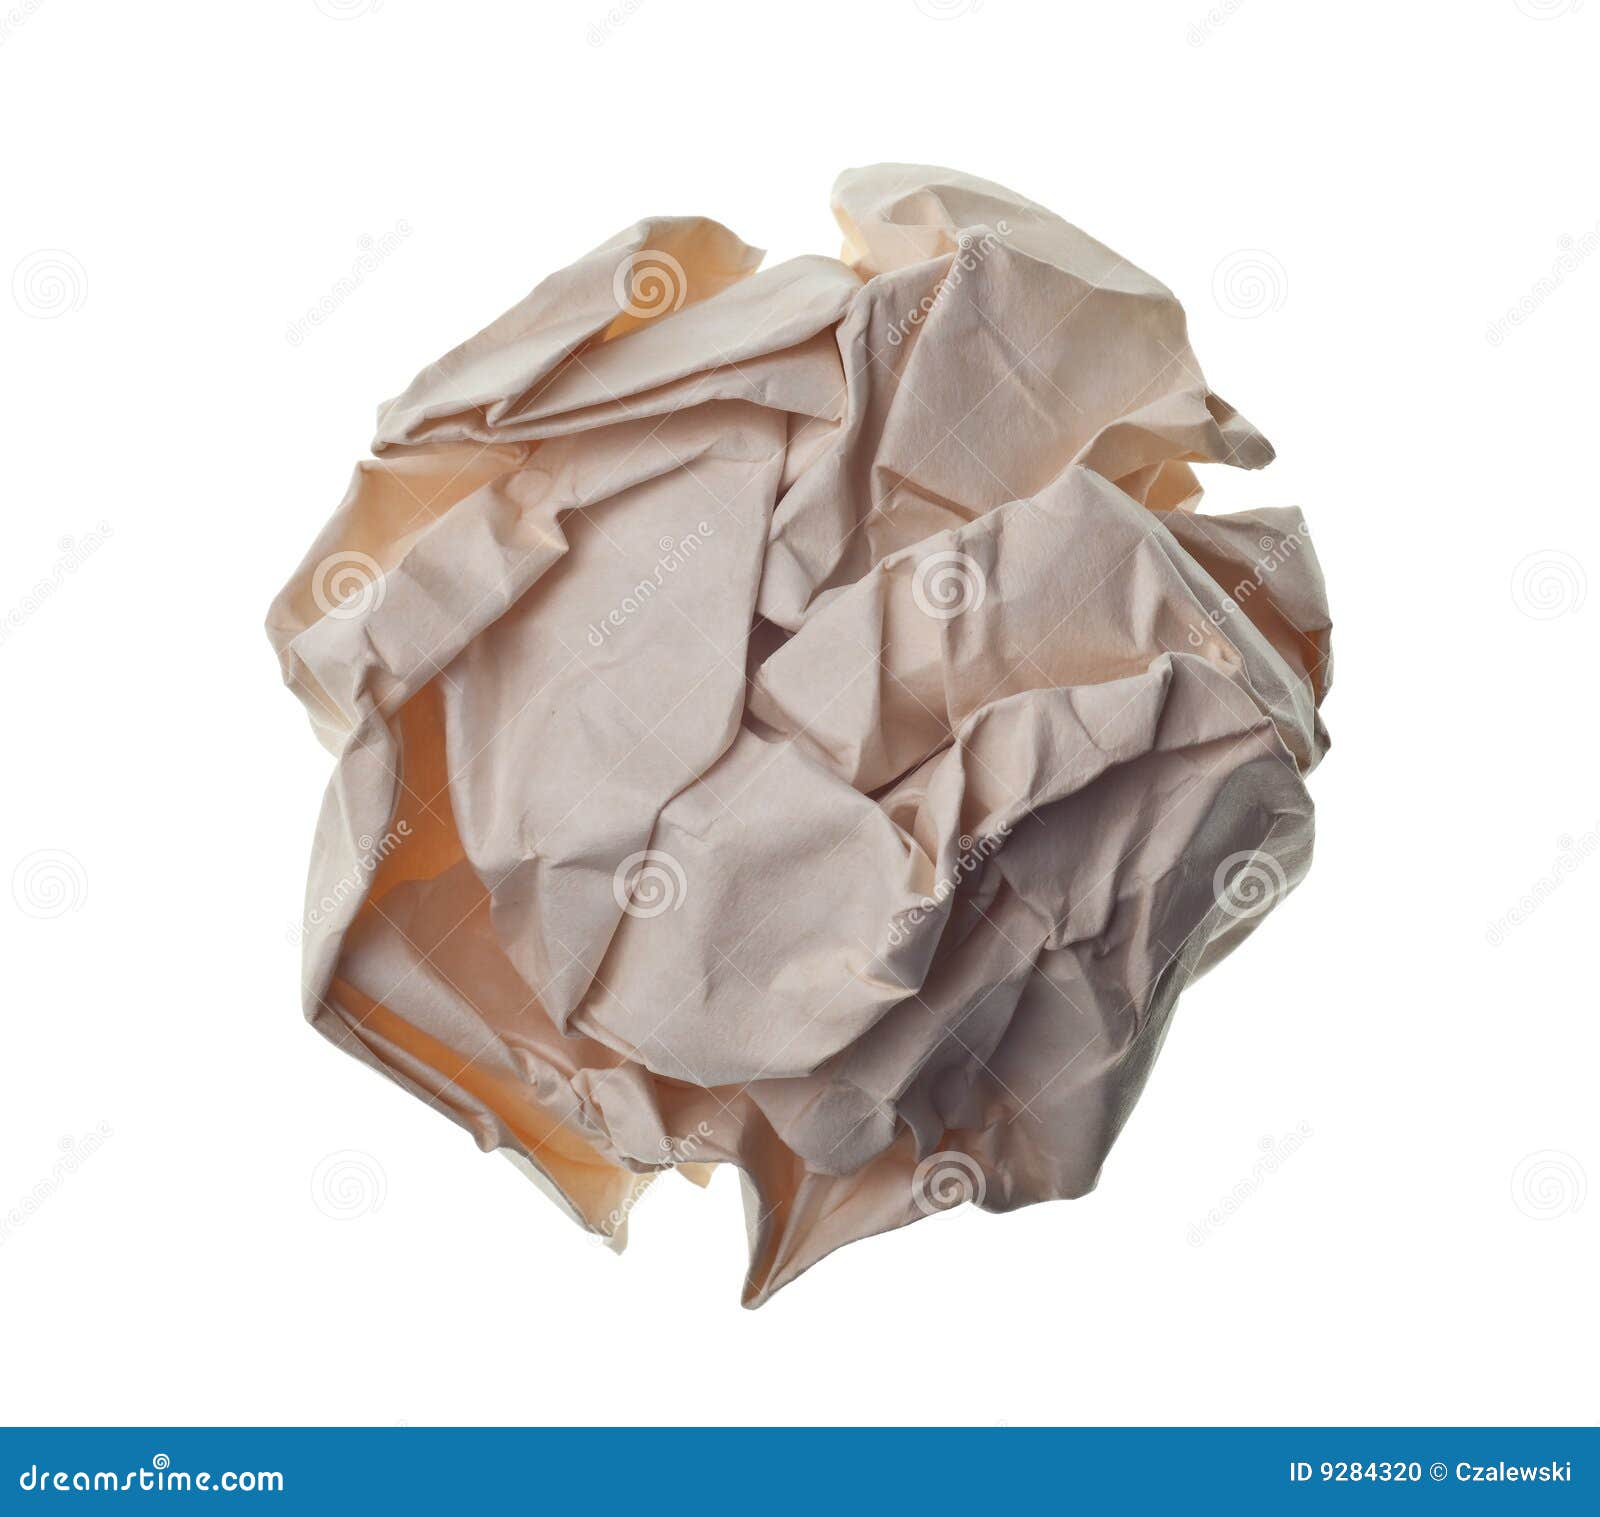 clipart crumpled paper - photo #38